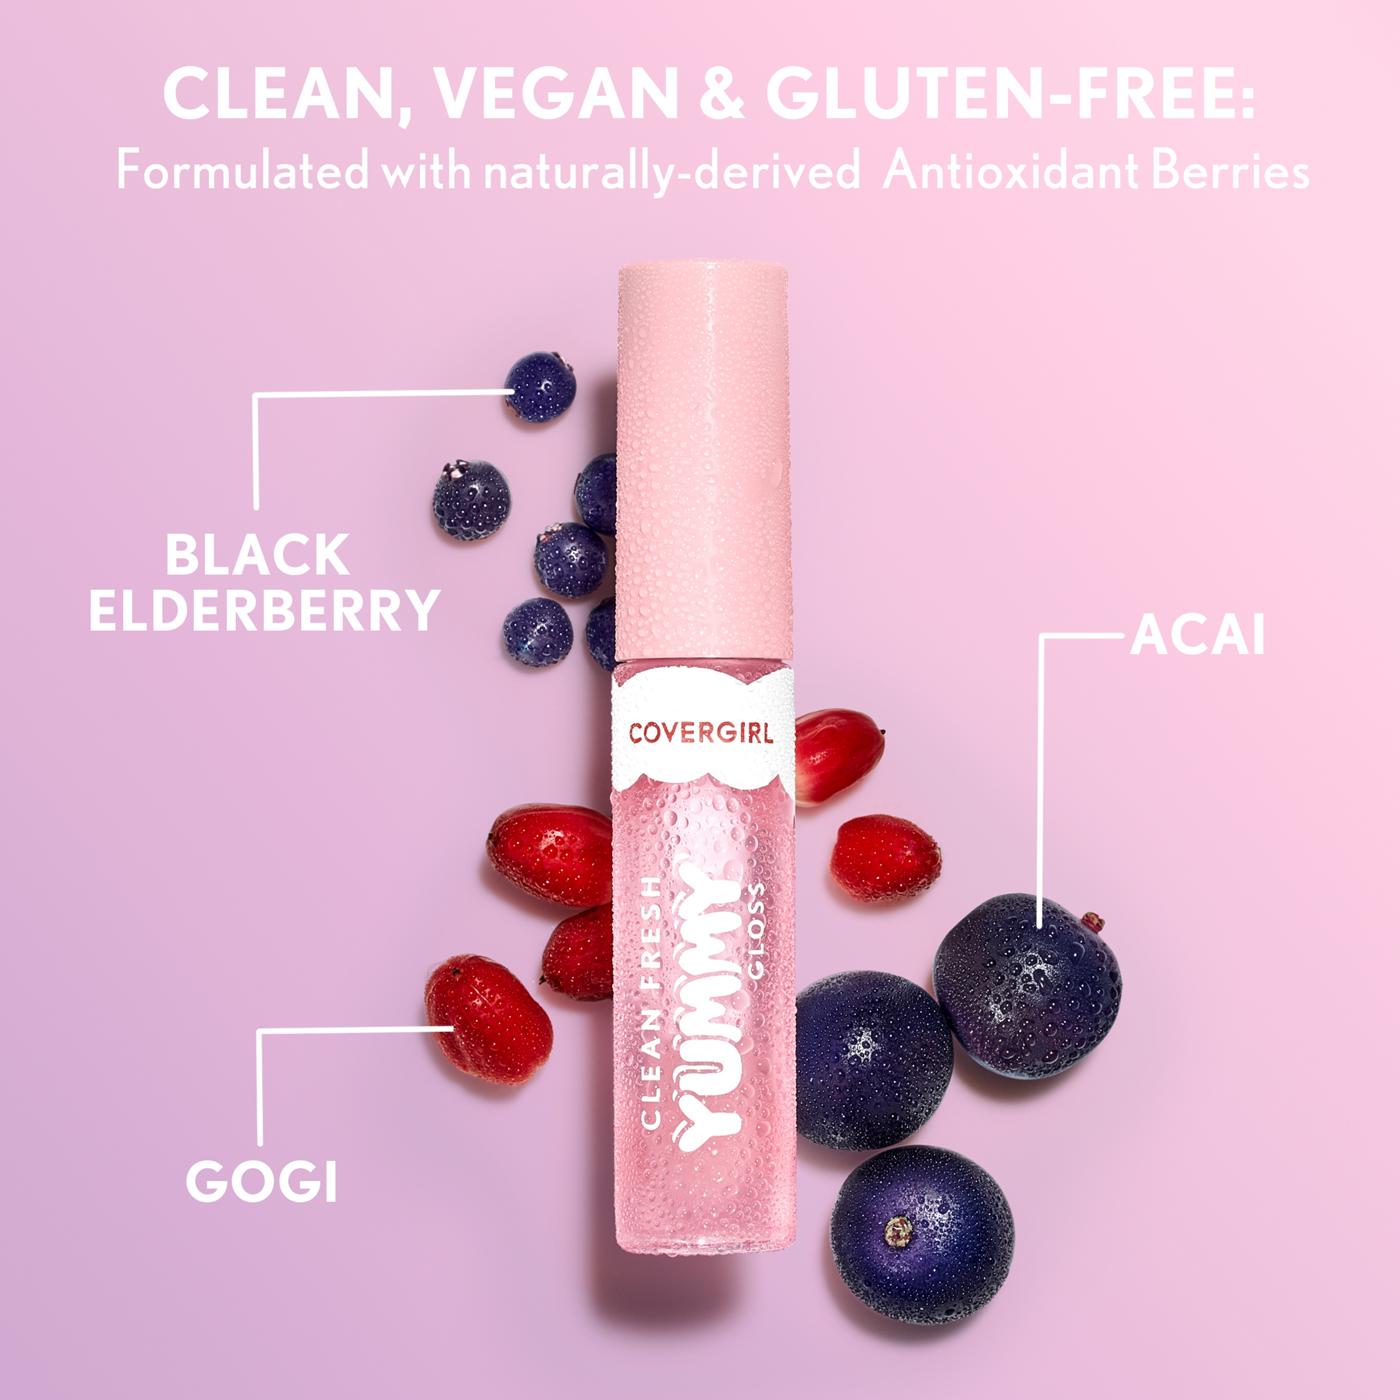 Covergirl Clean Fresh Yummy Lip Gloss - Coconuts About You; image 6 of 10